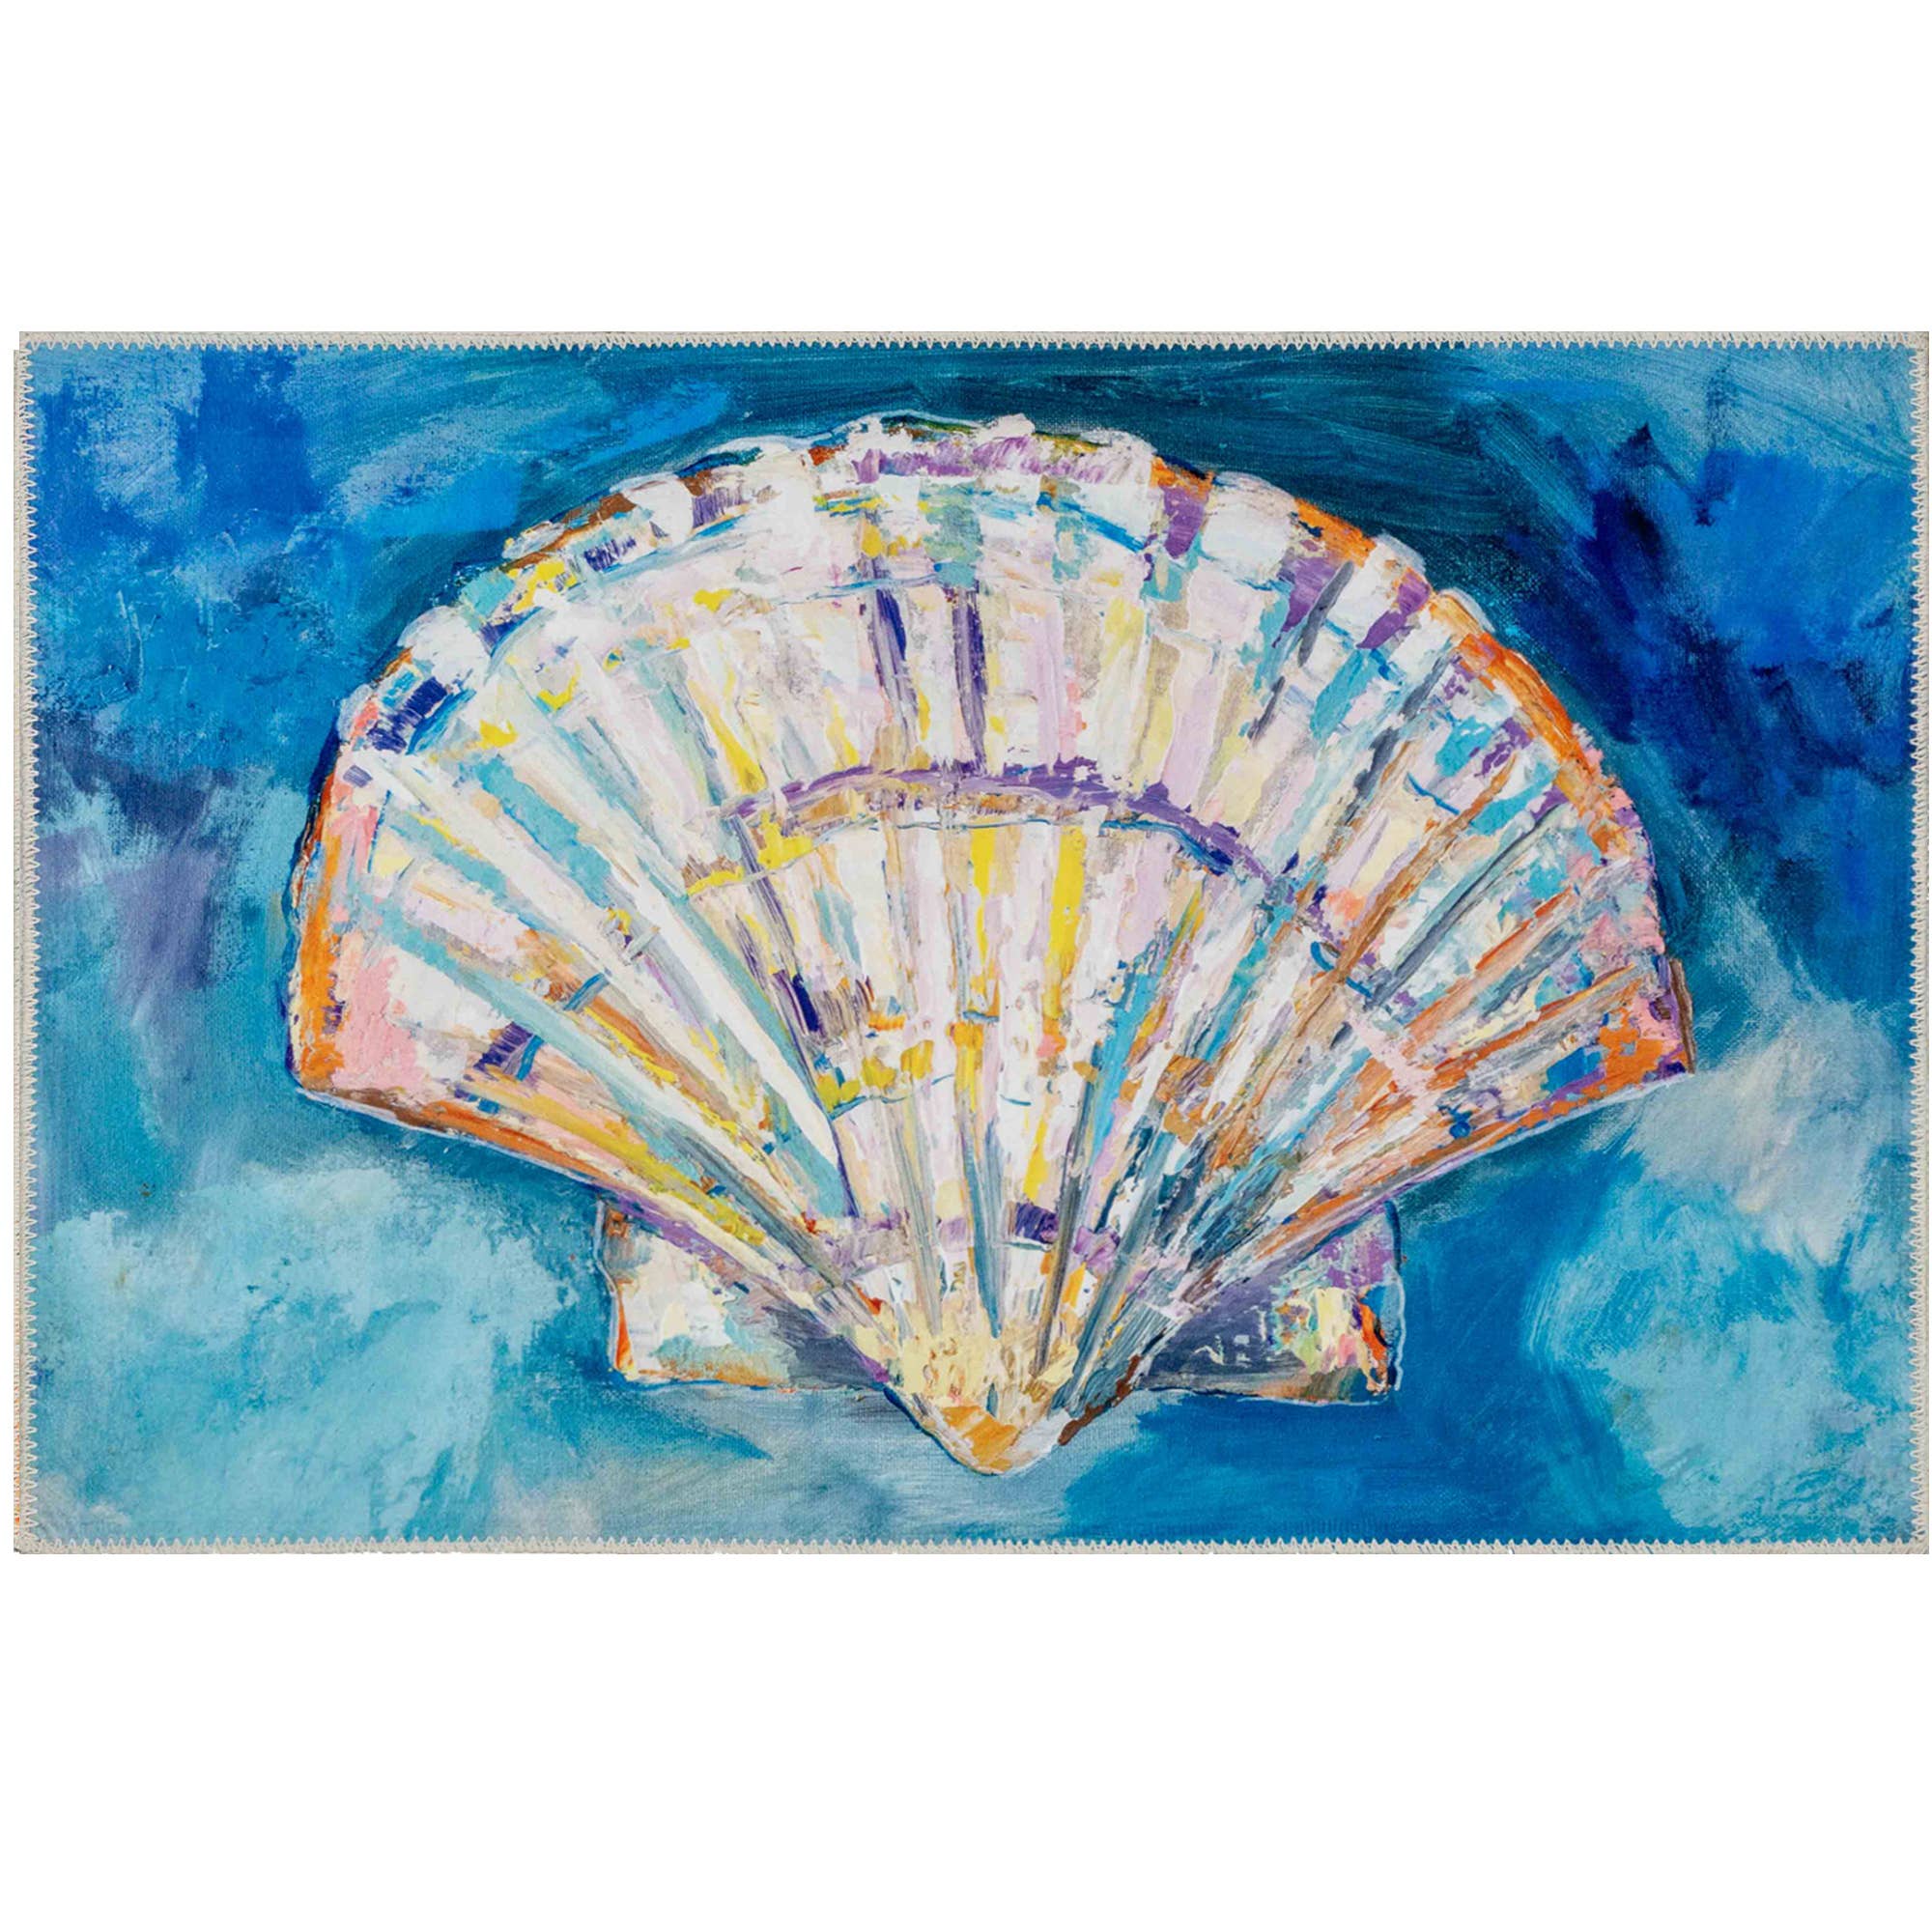 22" x 32" PAINTED SCALLOPED SHELL